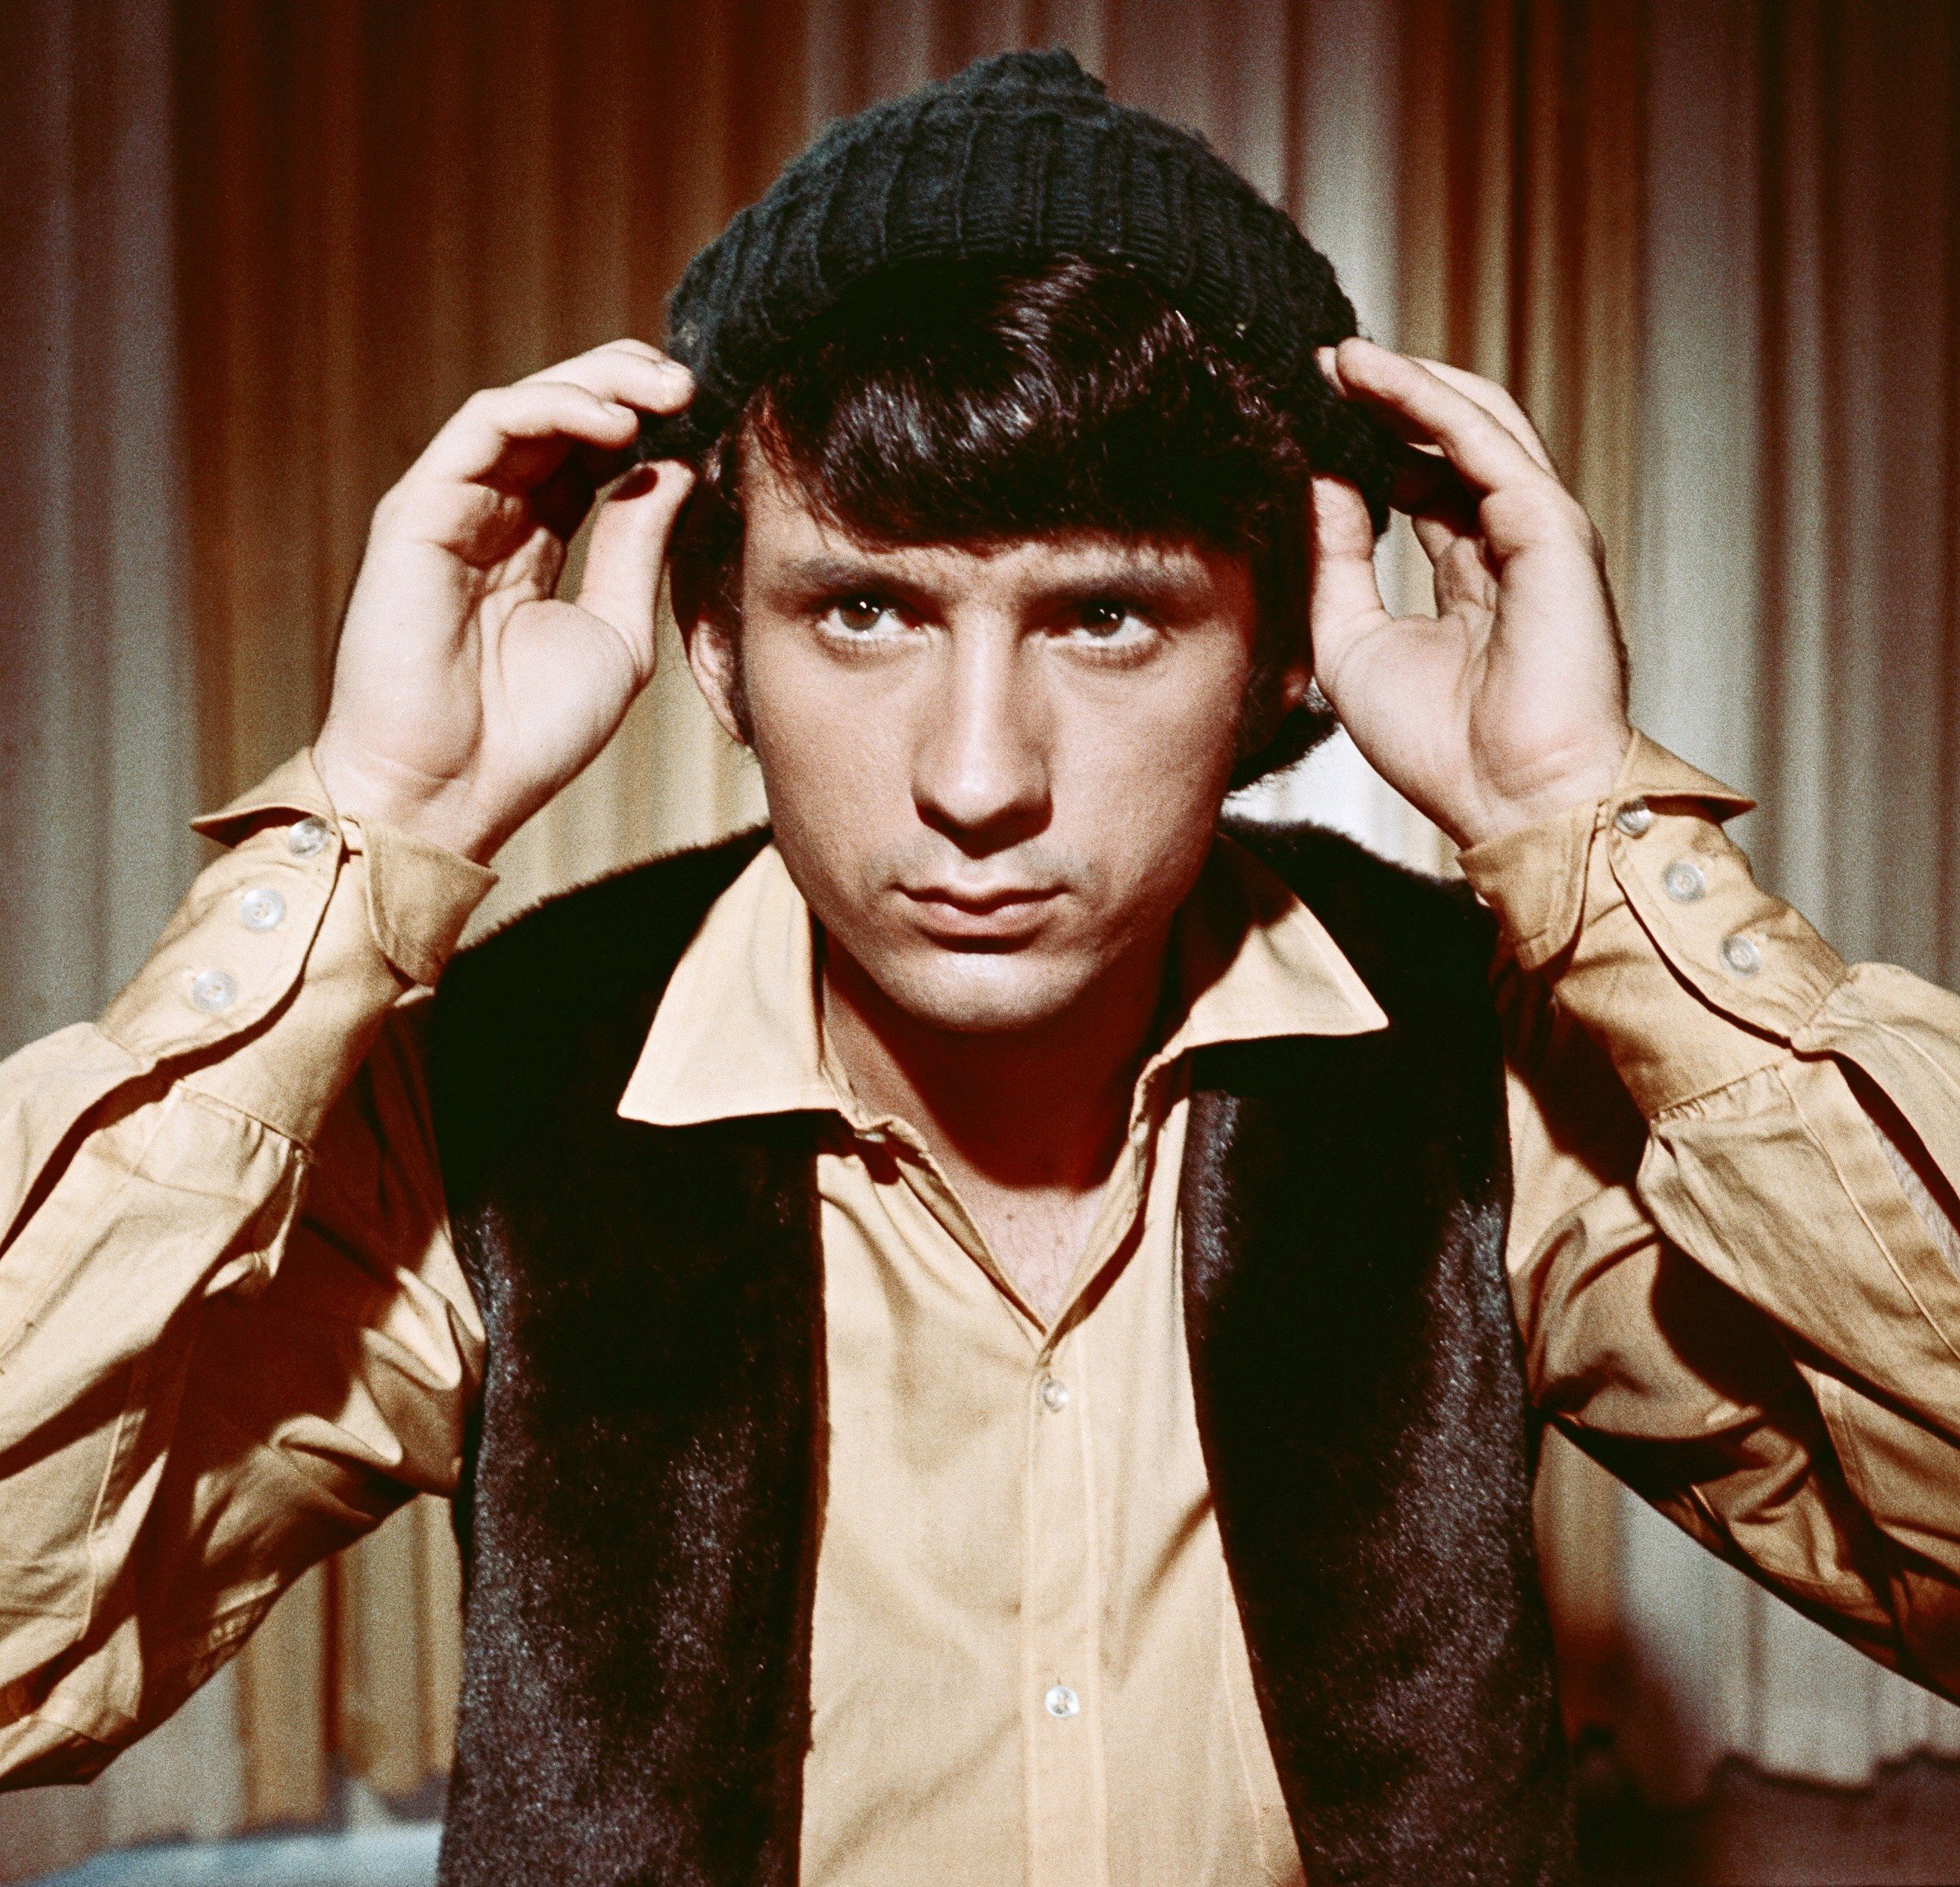 The Monkees' Mike Nesmith with a hat